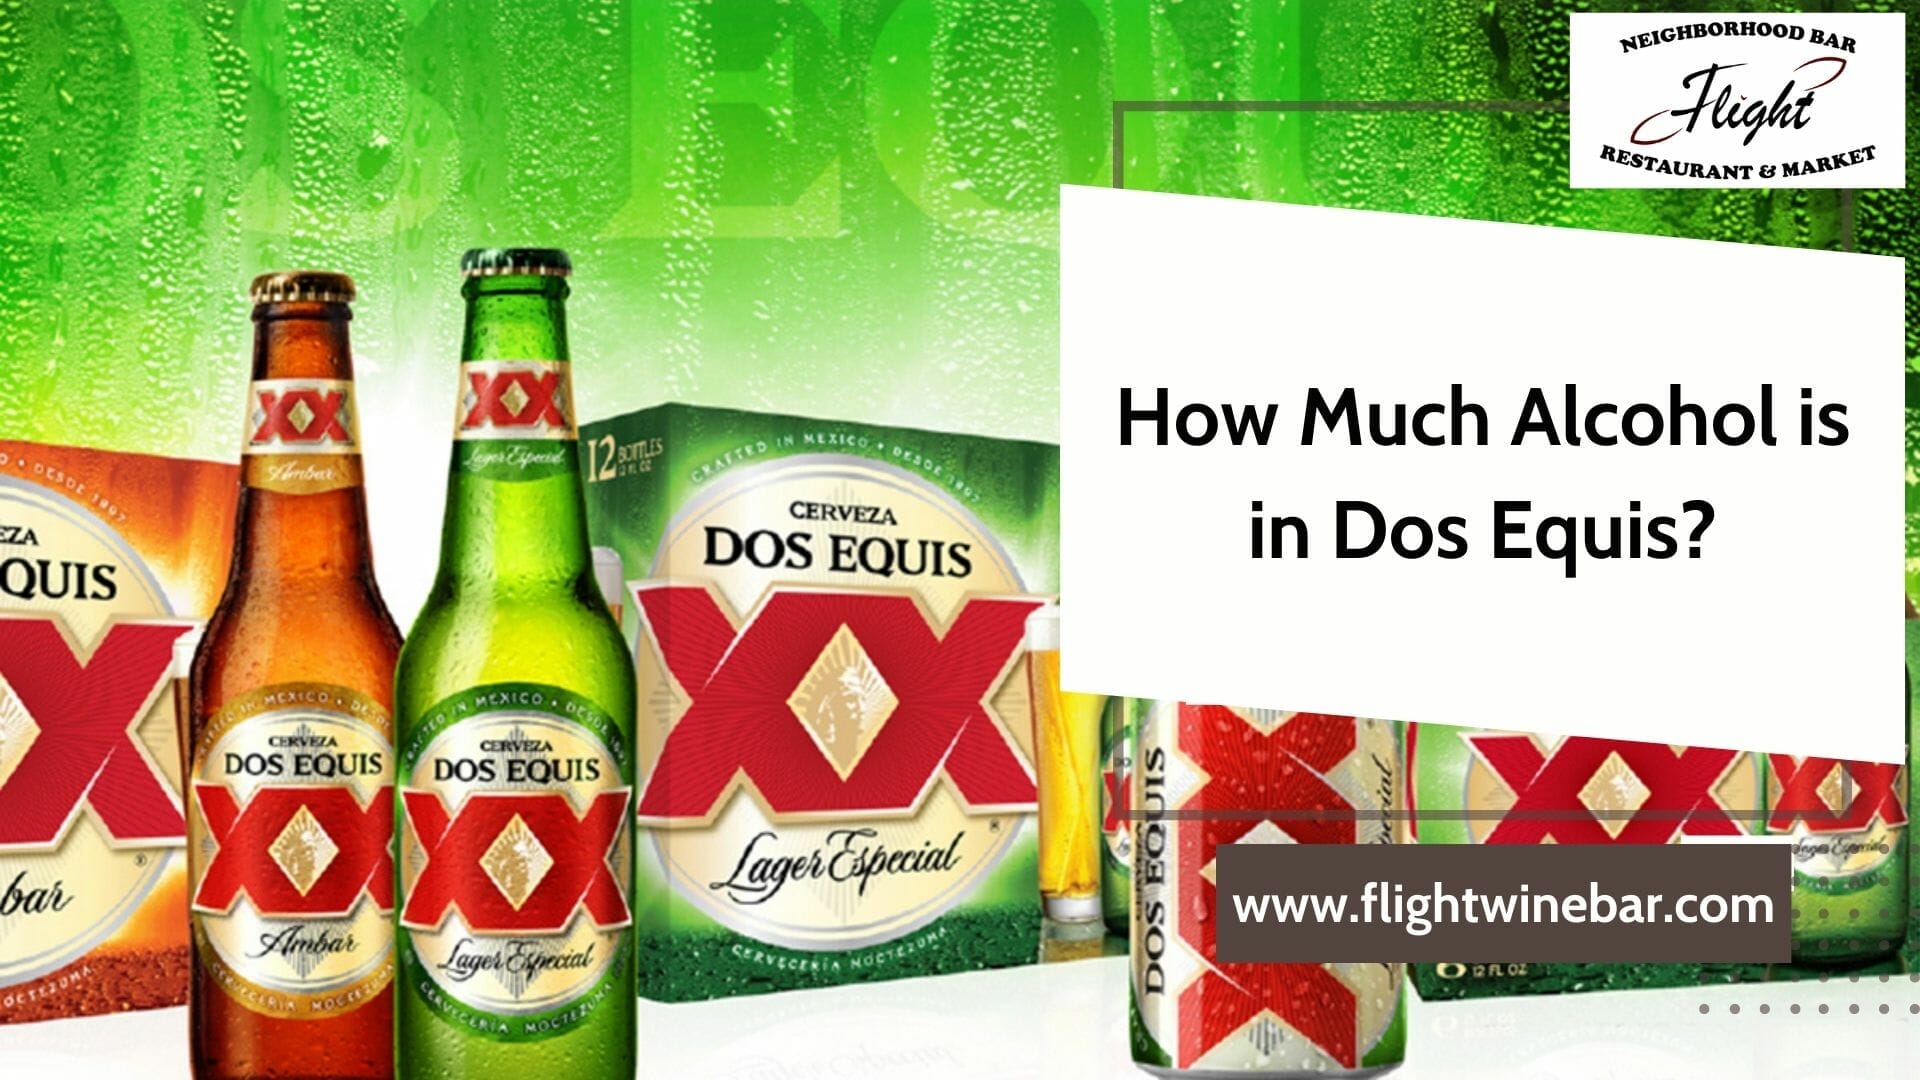 How Much Alcohol is in Dos Equis